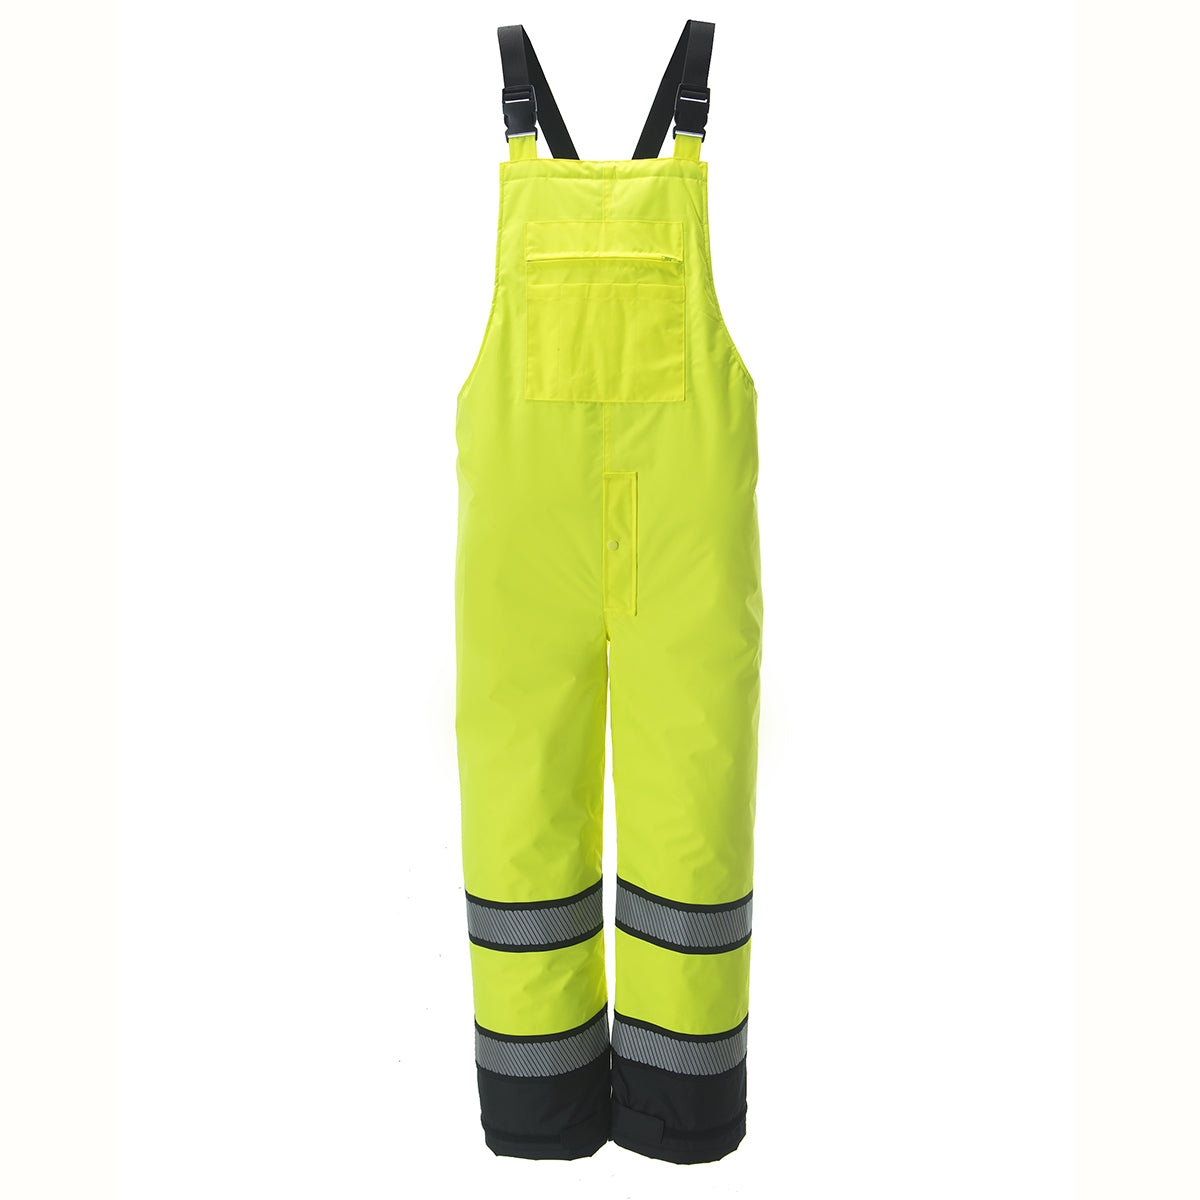 Rain Overalls, Quilted Bib Pants, High-Visibility